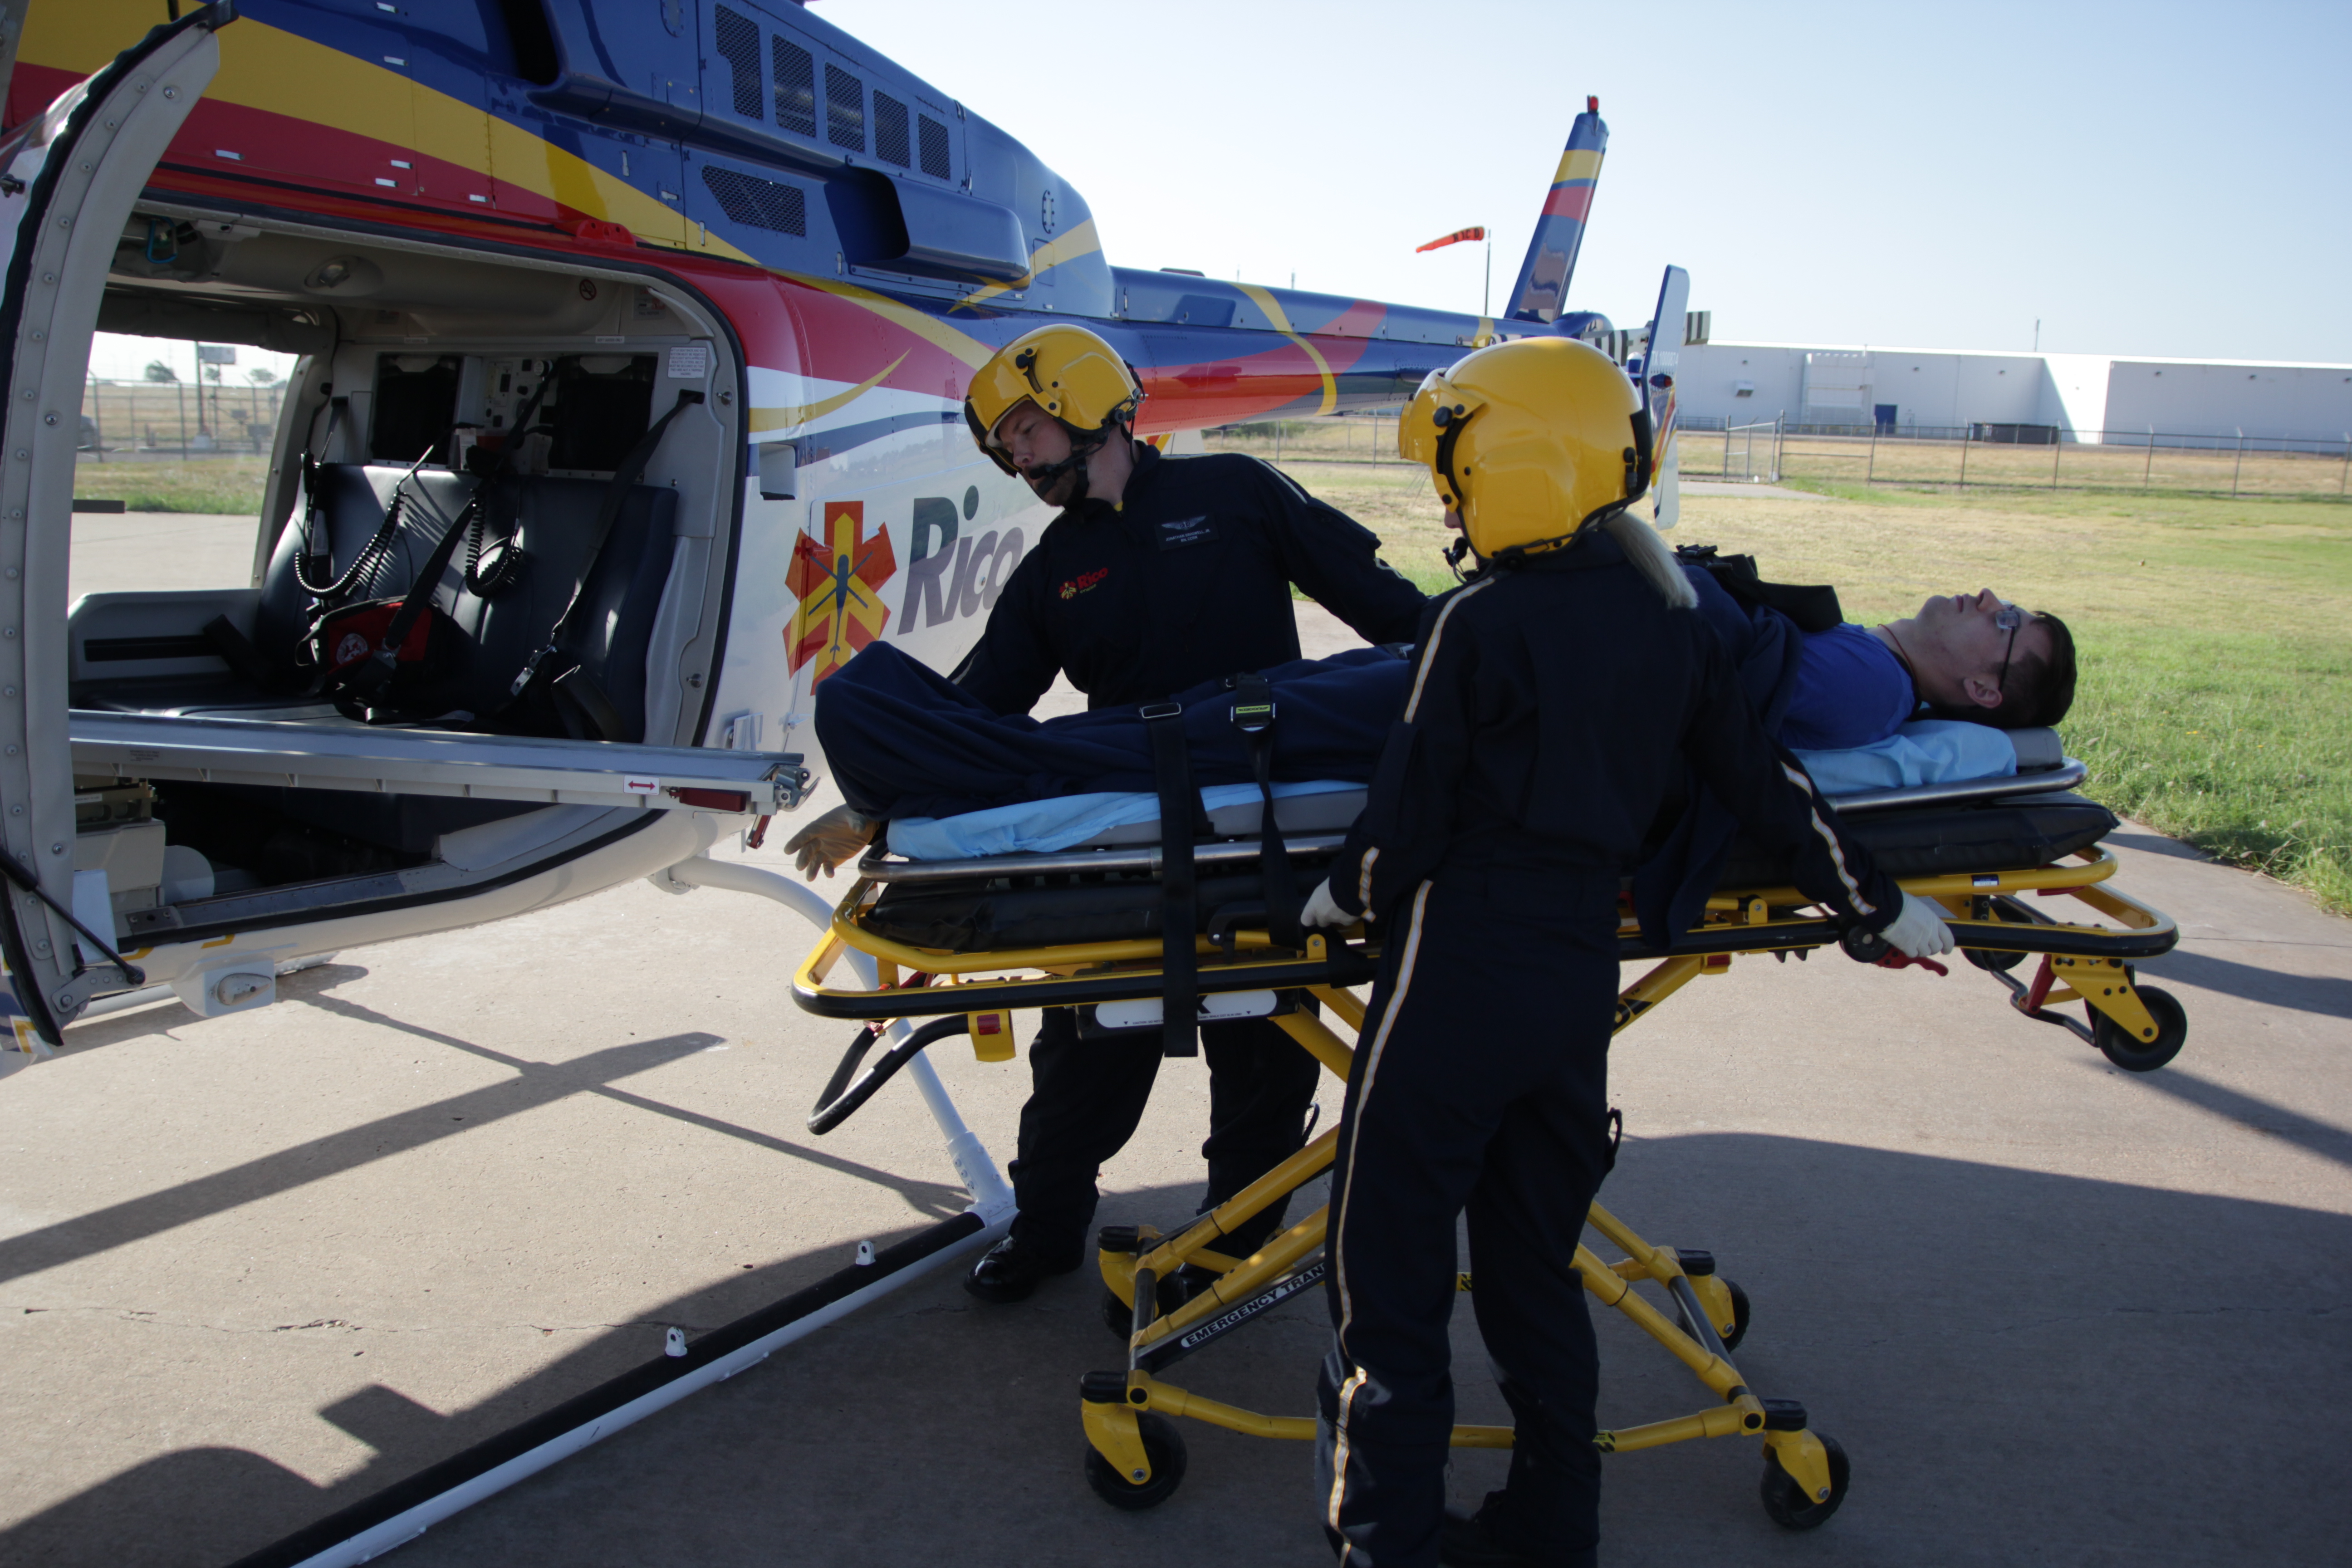 Crew Certifications of Quality Air Ambulance Companies